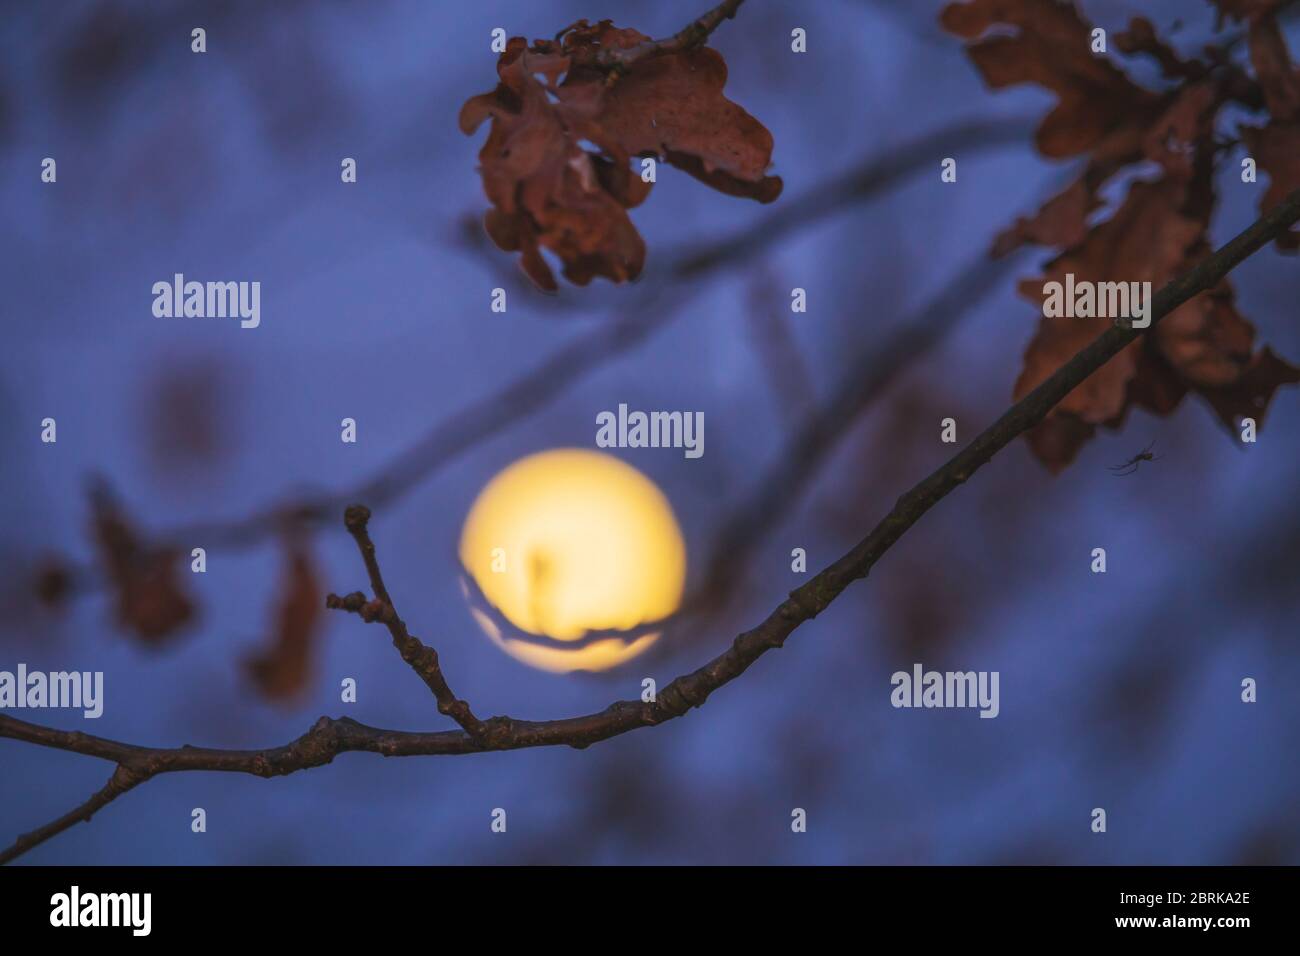 tree branches at night, moon in the background Stock Photo